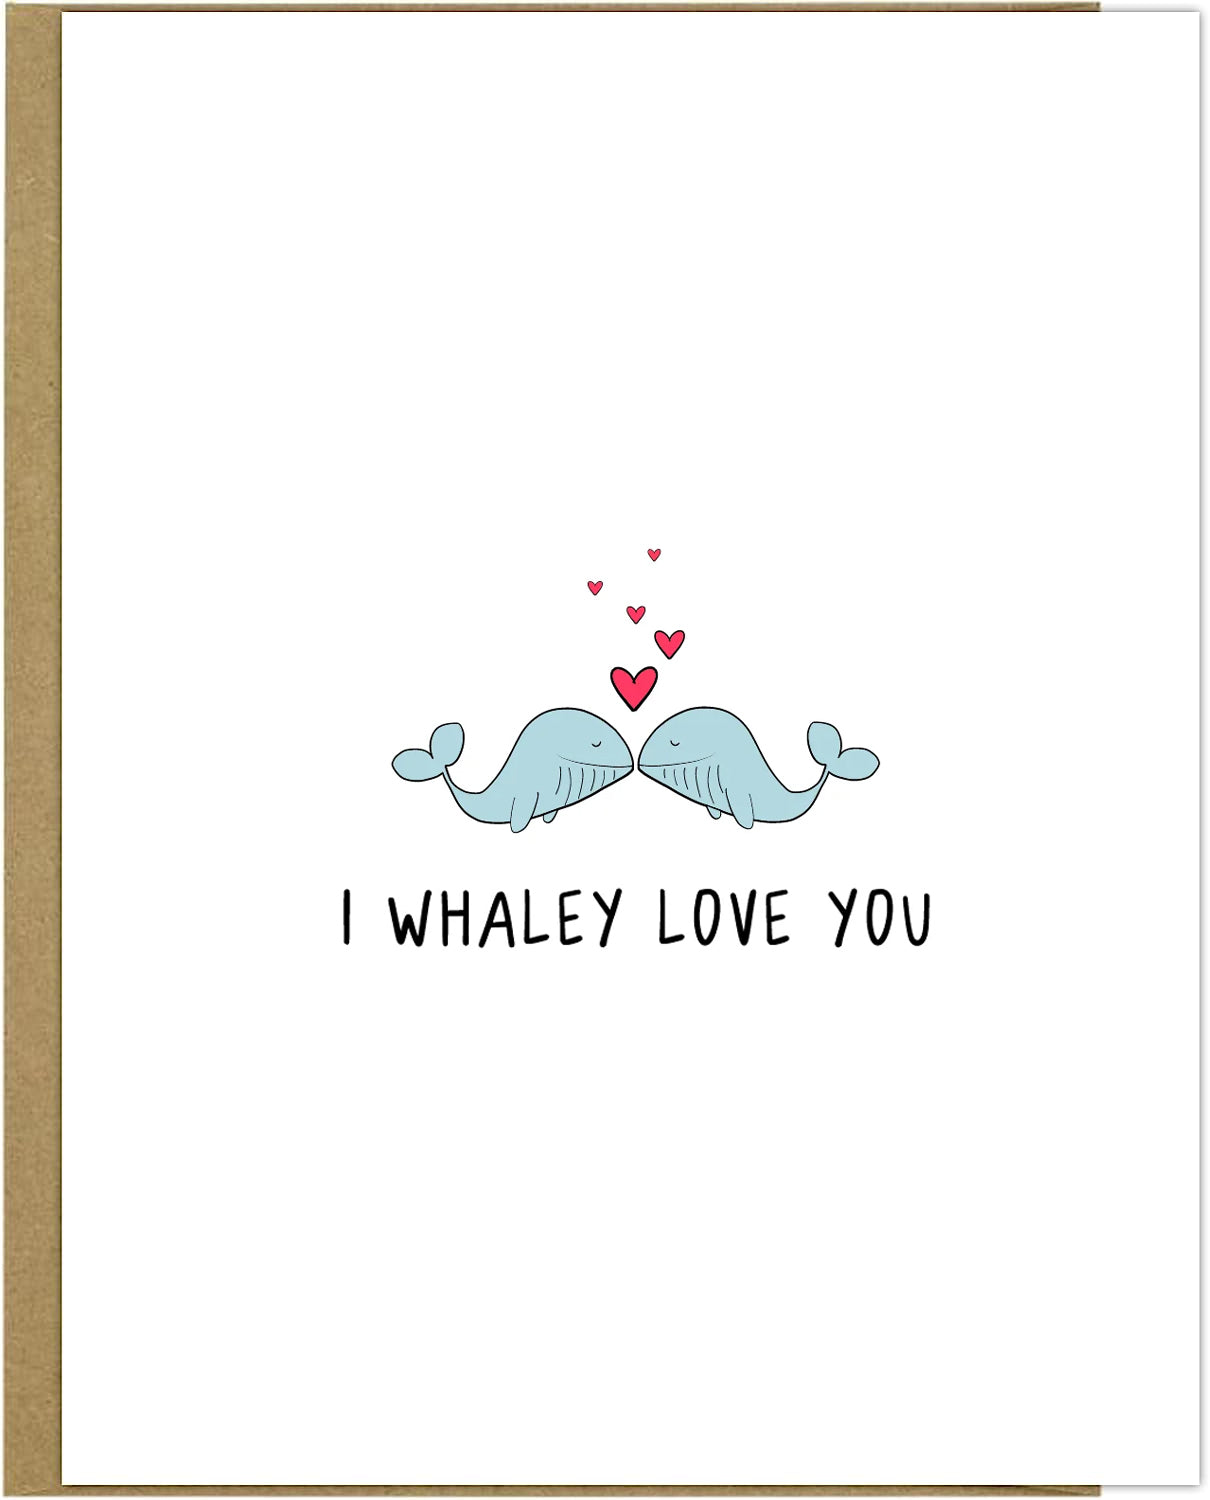 I love Whaley Love Card (blue) by rockdoodles.